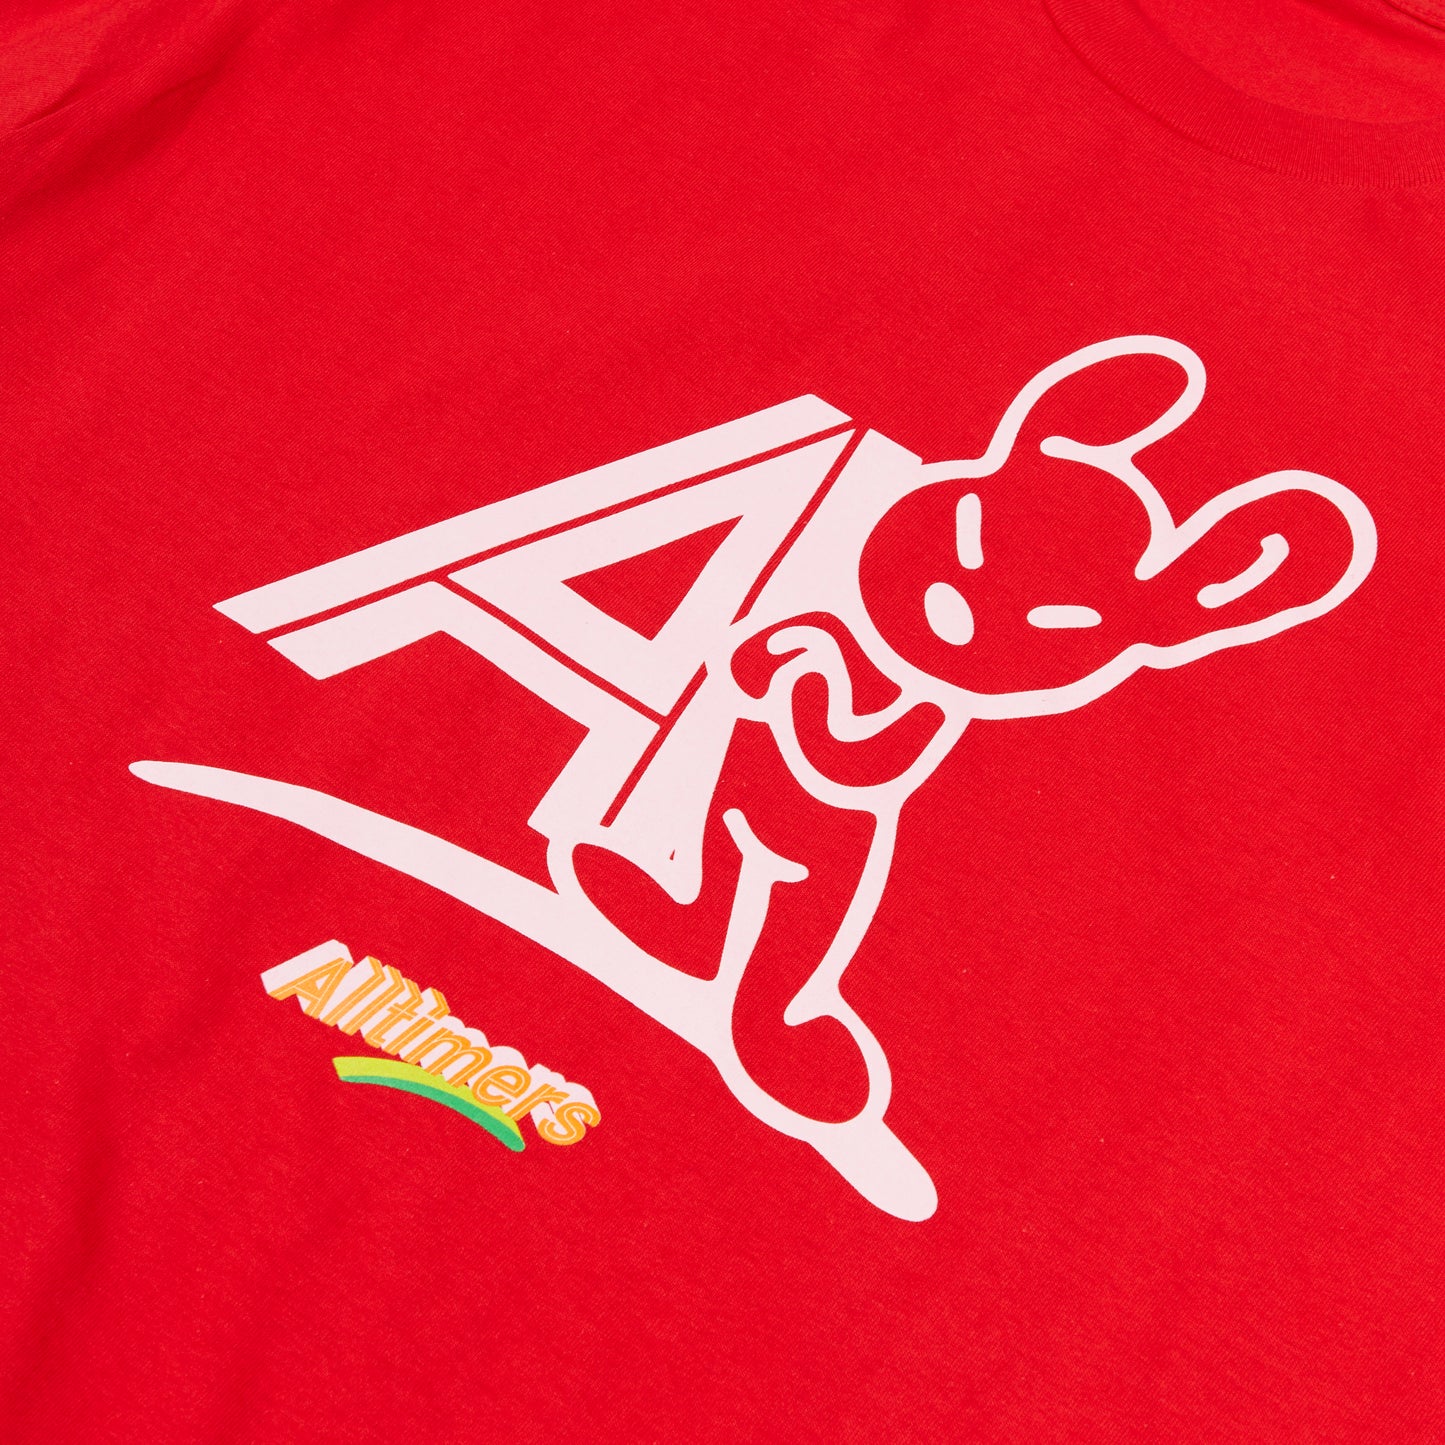 Alltimers MAD RABIT TEE "Red"